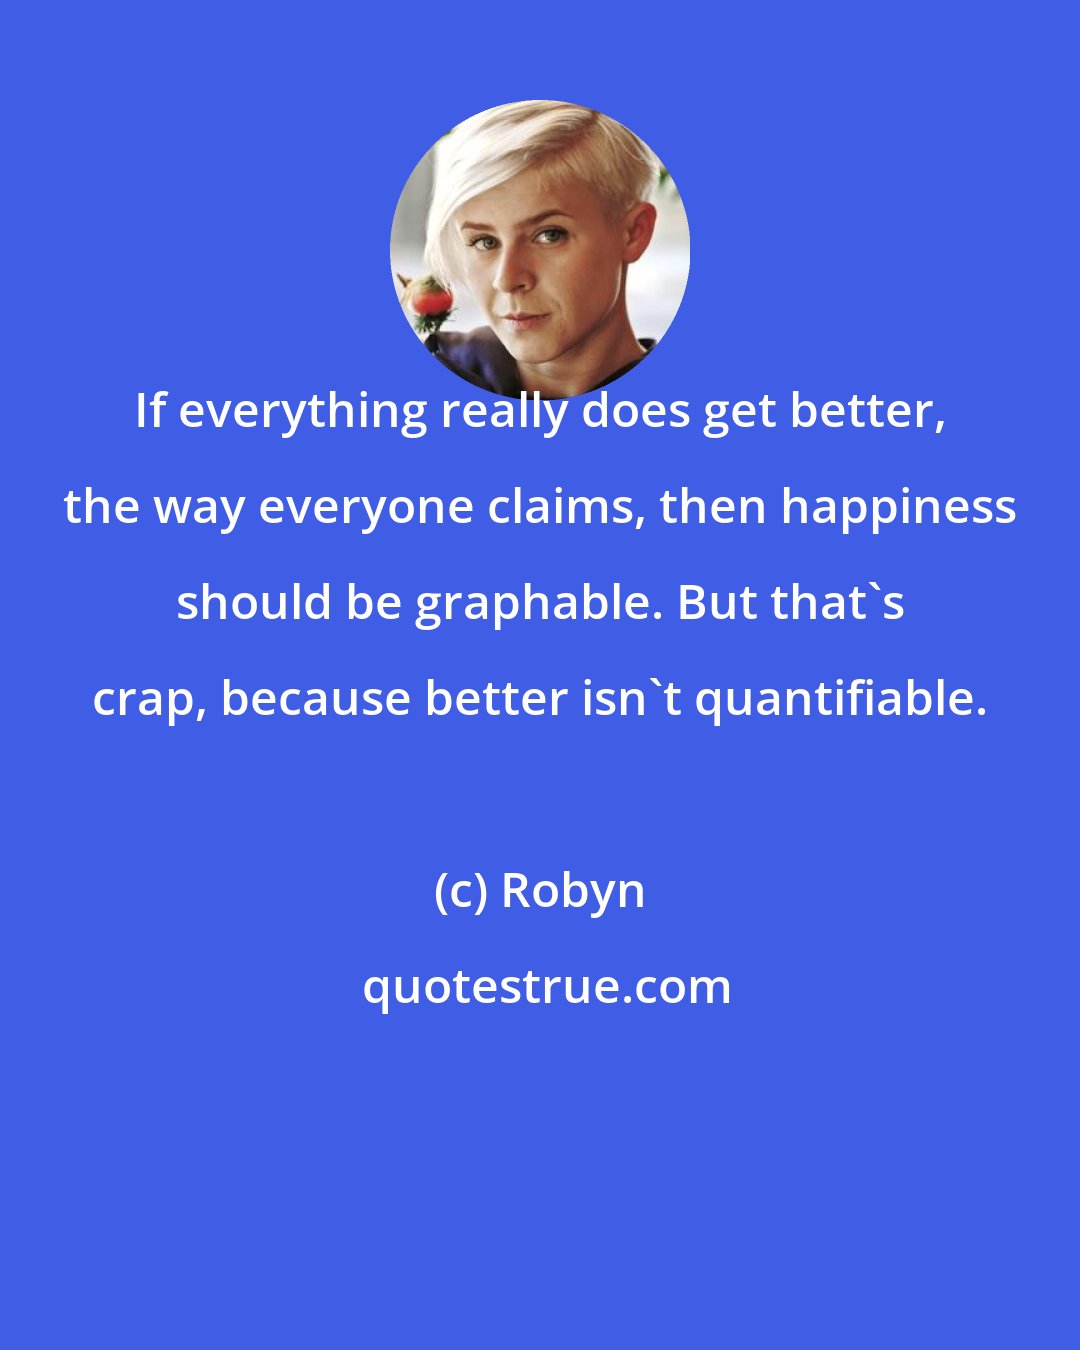 Robyn: If everything really does get better, the way everyone claims, then happiness should be graphable. But that's crap, because better isn't quantifiable.